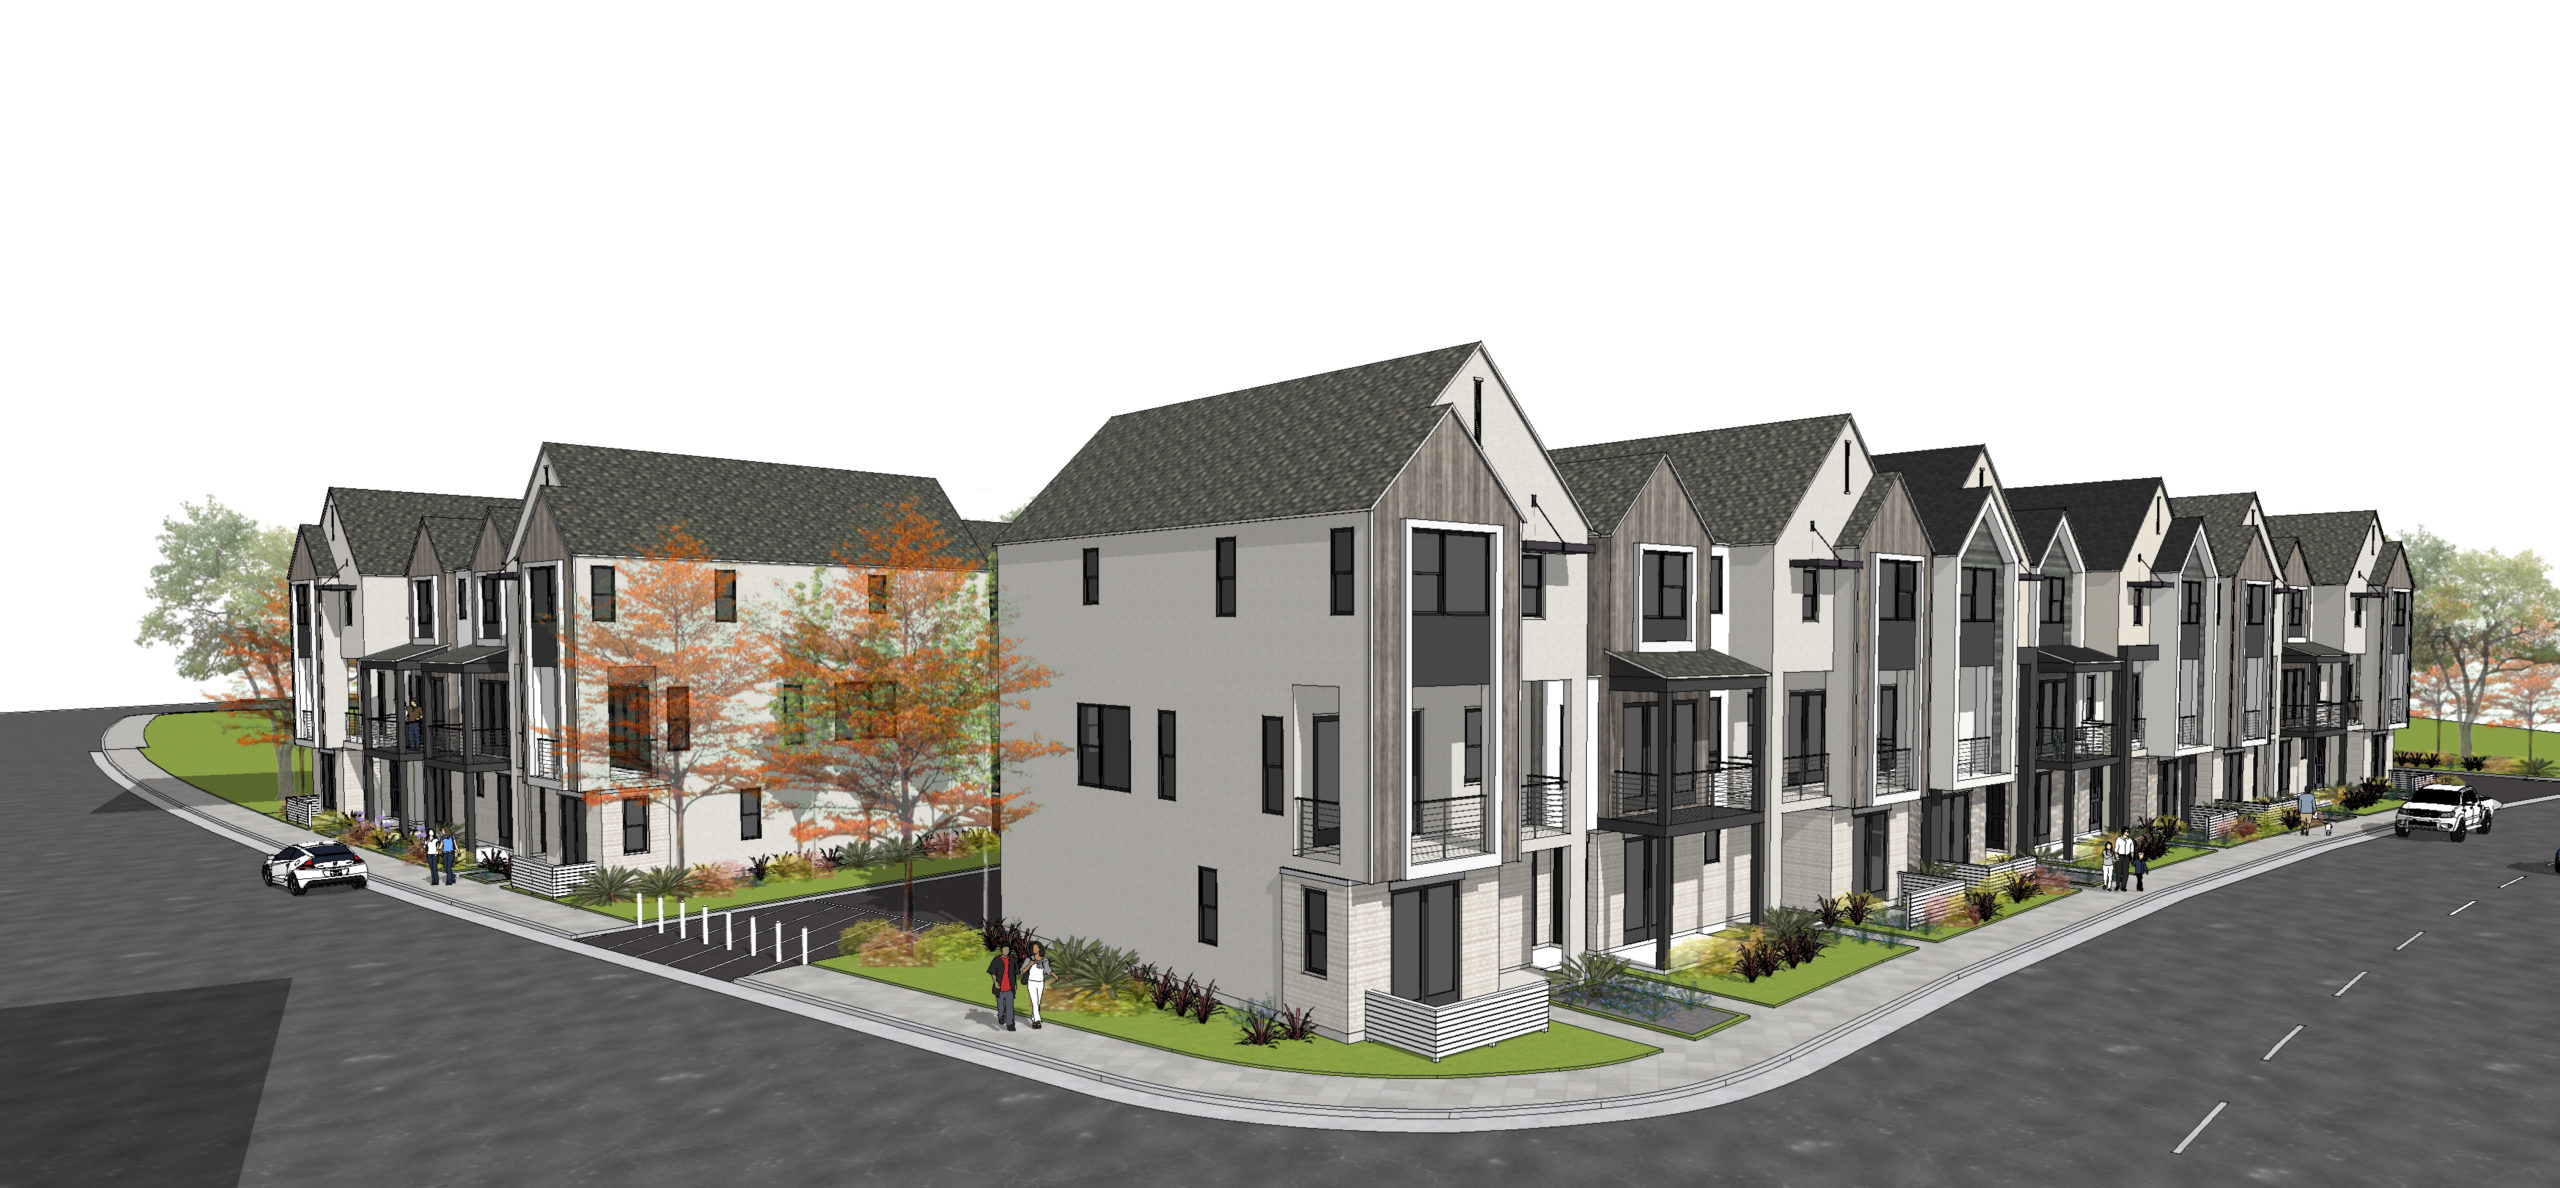 707 Commons Drive townhomes, rendering by BSB Design